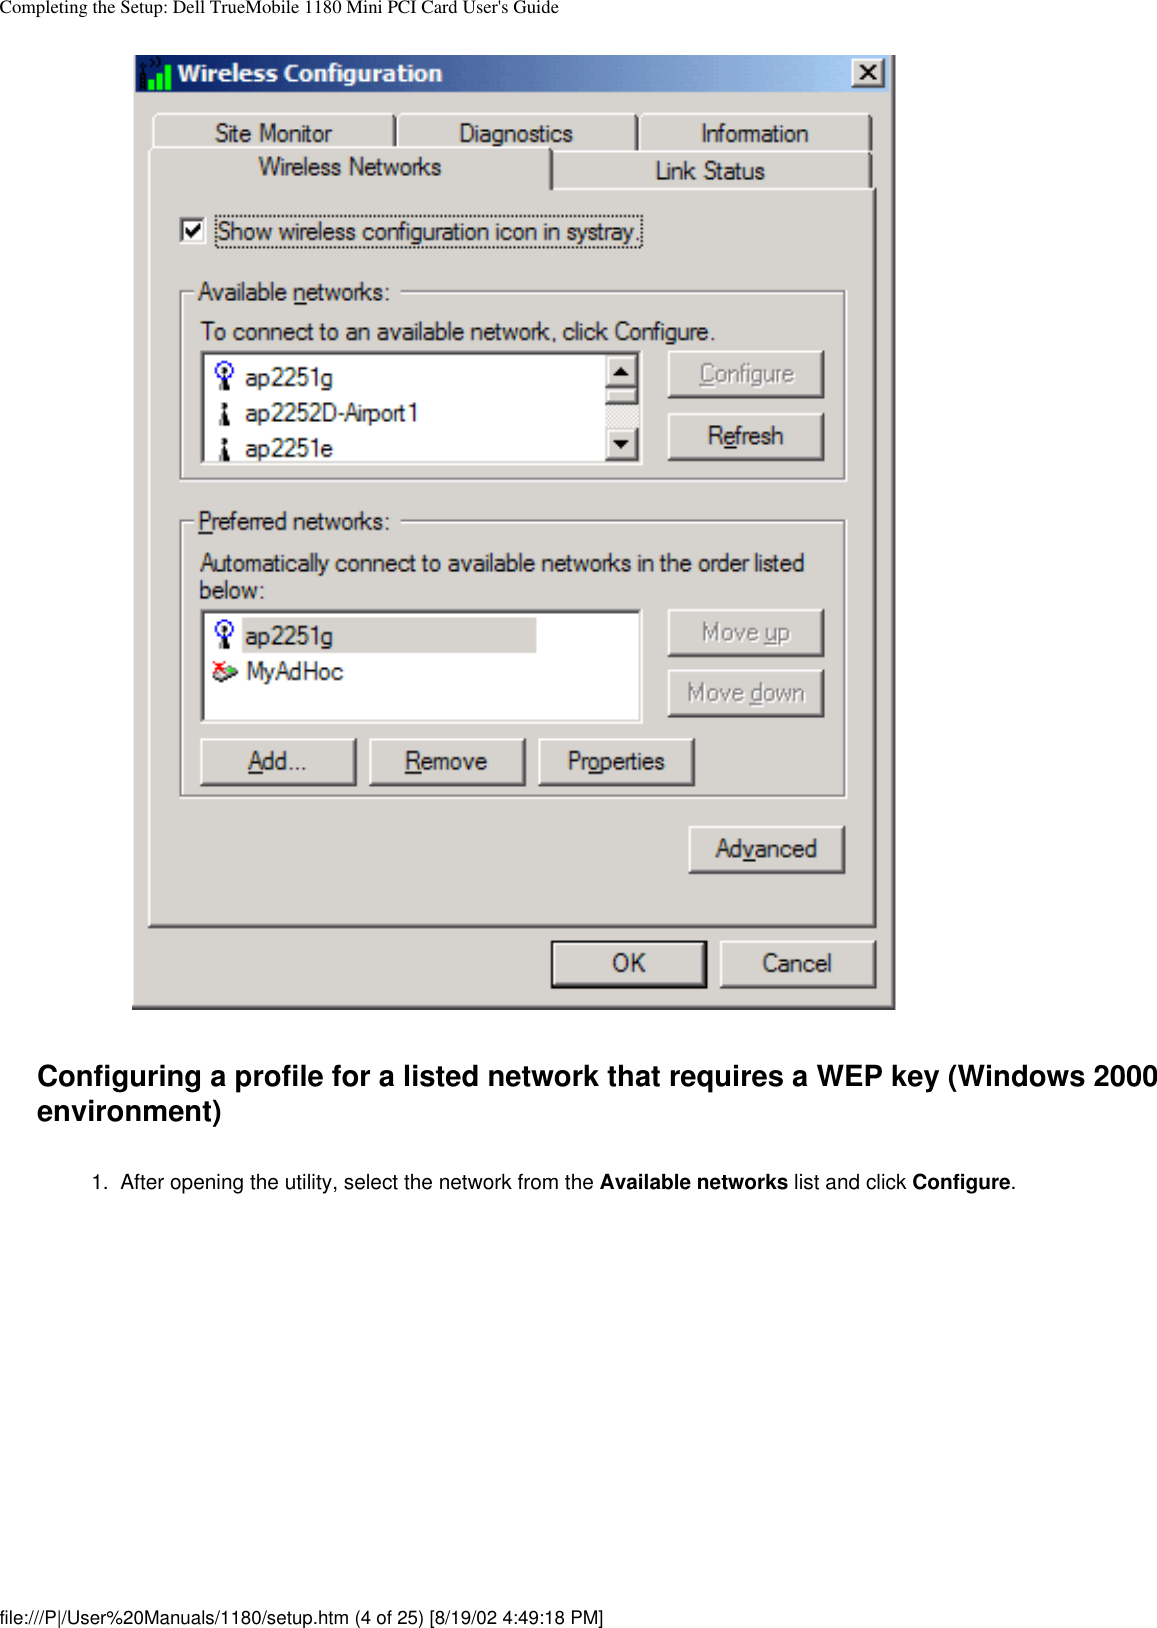 Completing the Setup: Dell TrueMobile 1180 Mini PCI Card User&apos;s GuideConfiguring a profile for a listed network that requires a WEP key (Windows 2000 environment)1.  After opening the utility, select the network from the Available networks list and click Configure. file:///P|/User%20Manuals/1180/setup.htm (4 of 25) [8/19/02 4:49:18 PM]